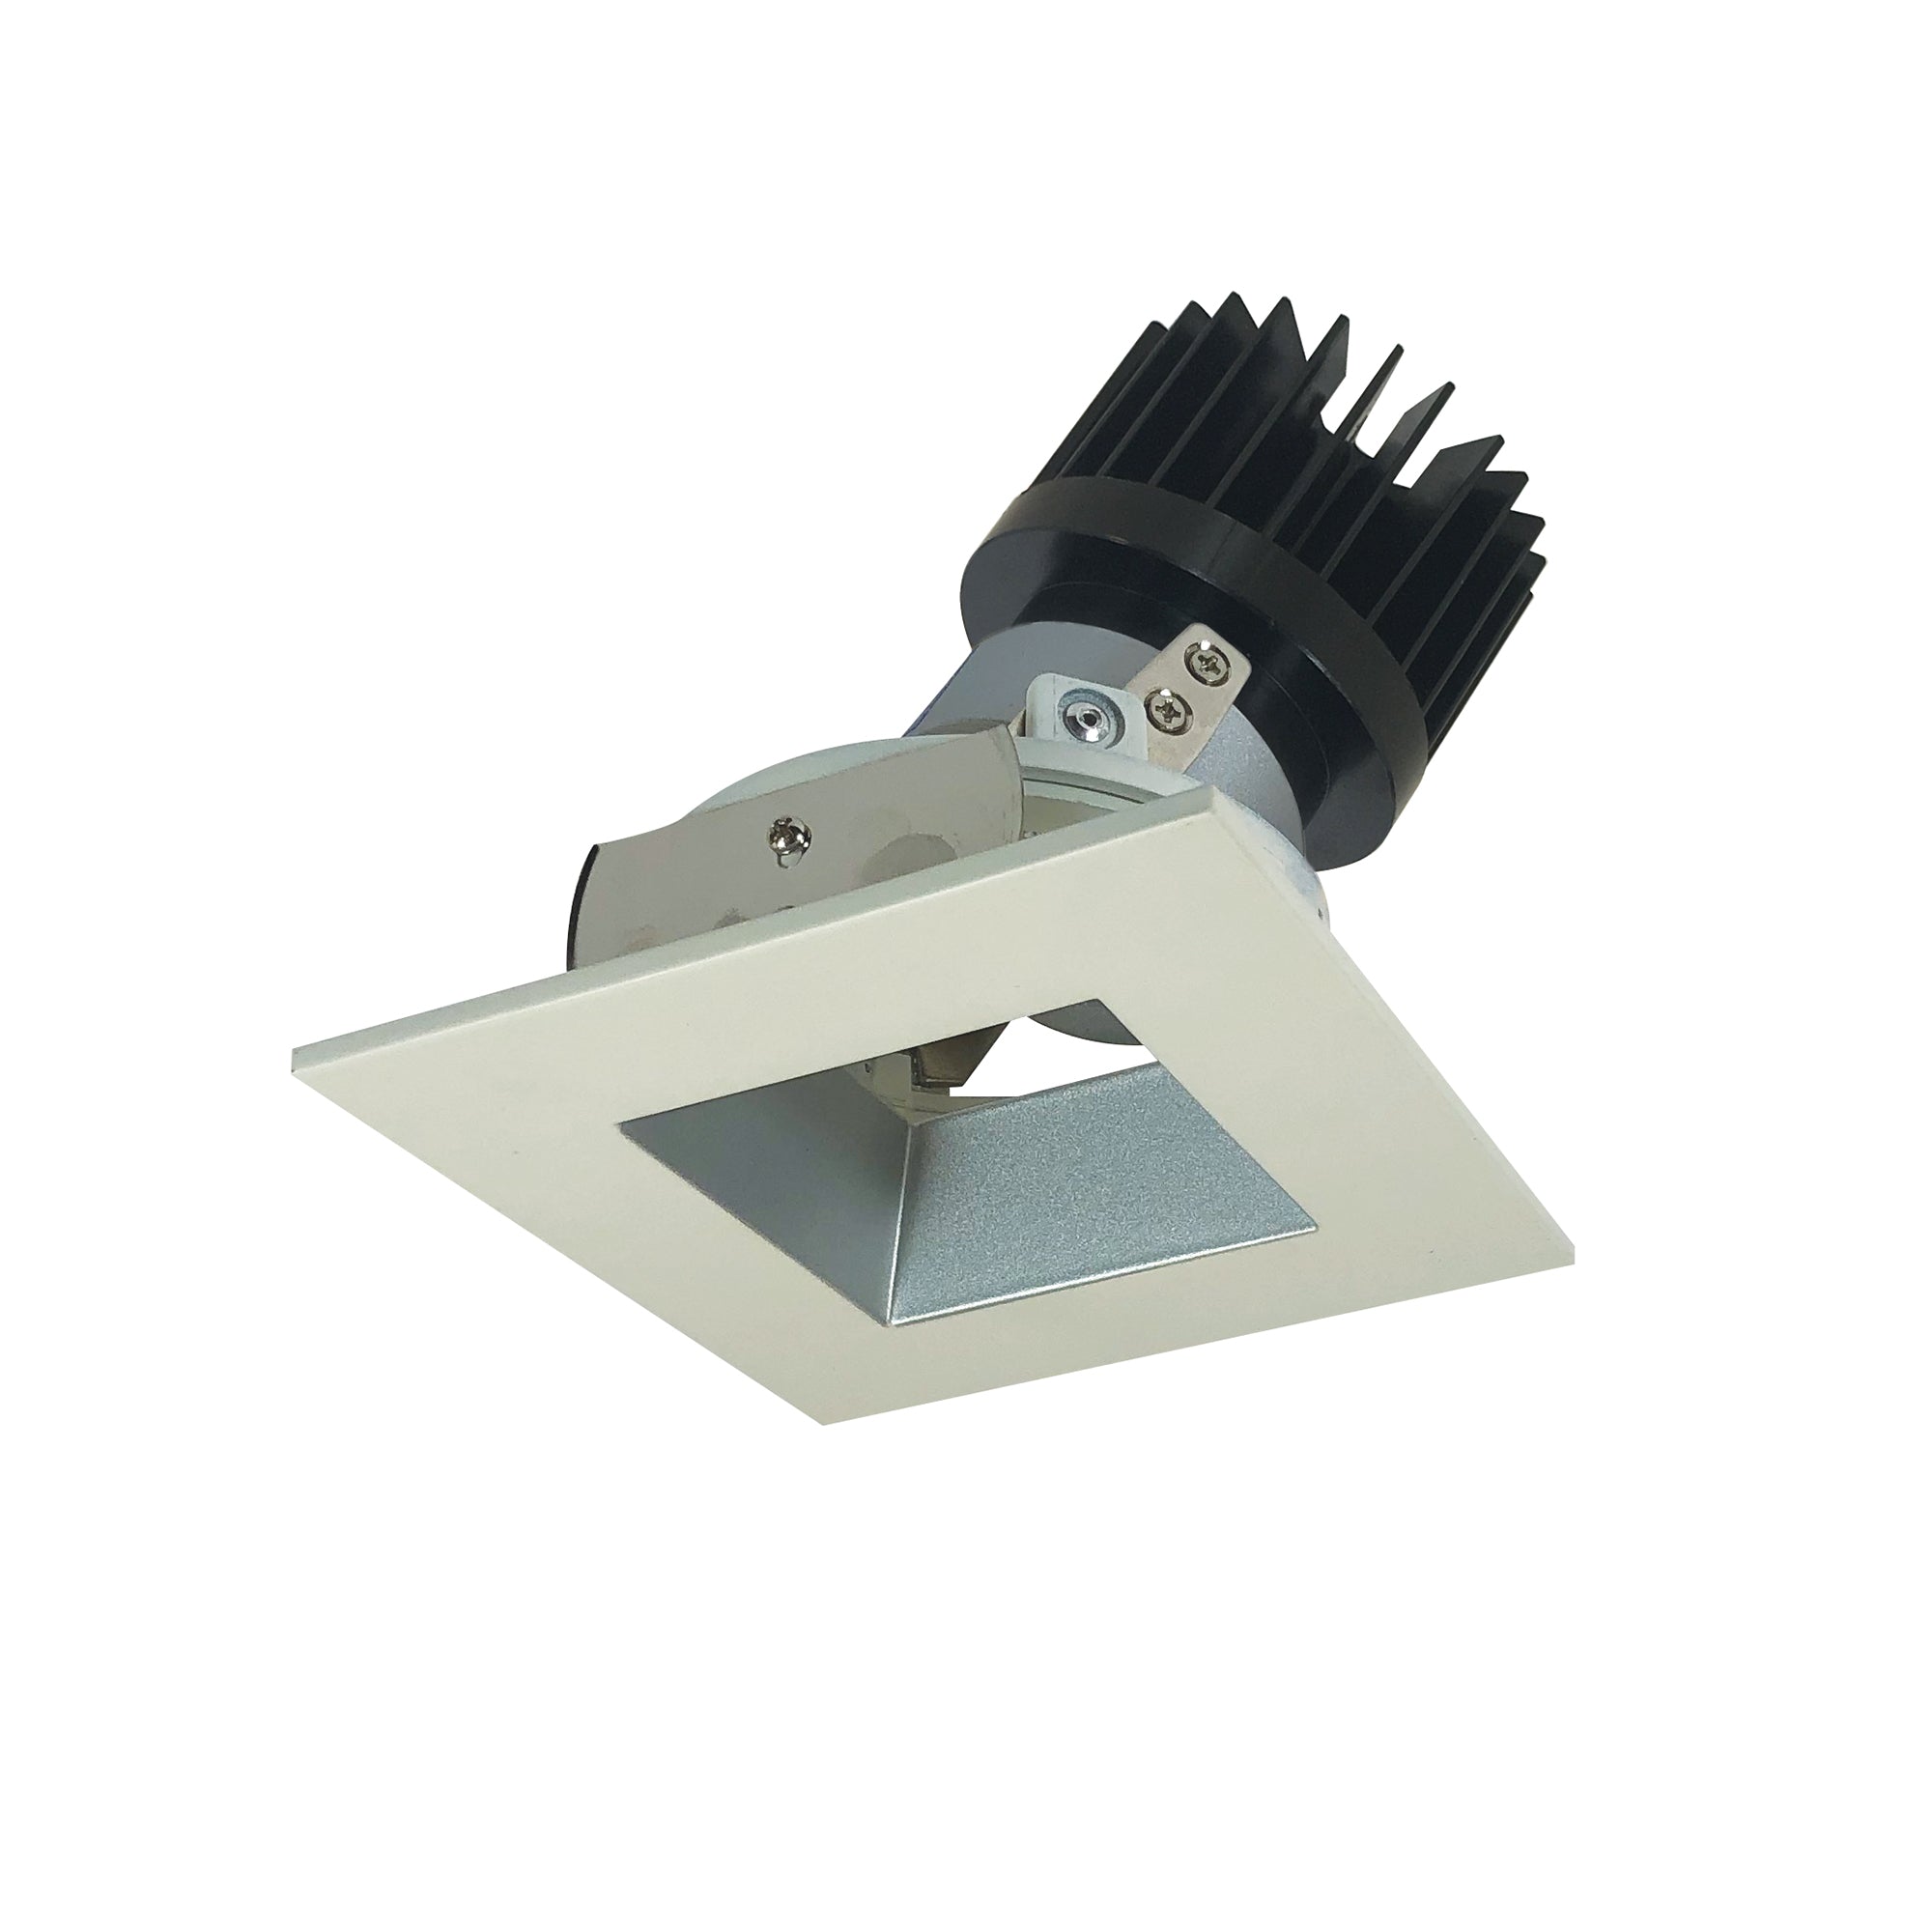 Nora Lighting NIO-4SDSQ40XHW/HL 4" Iolite LED Square Adjustable Reflector With Square Aperture, 1500lm/2000lm (varies by housing), 4000K - Haze Reflector / White Flange